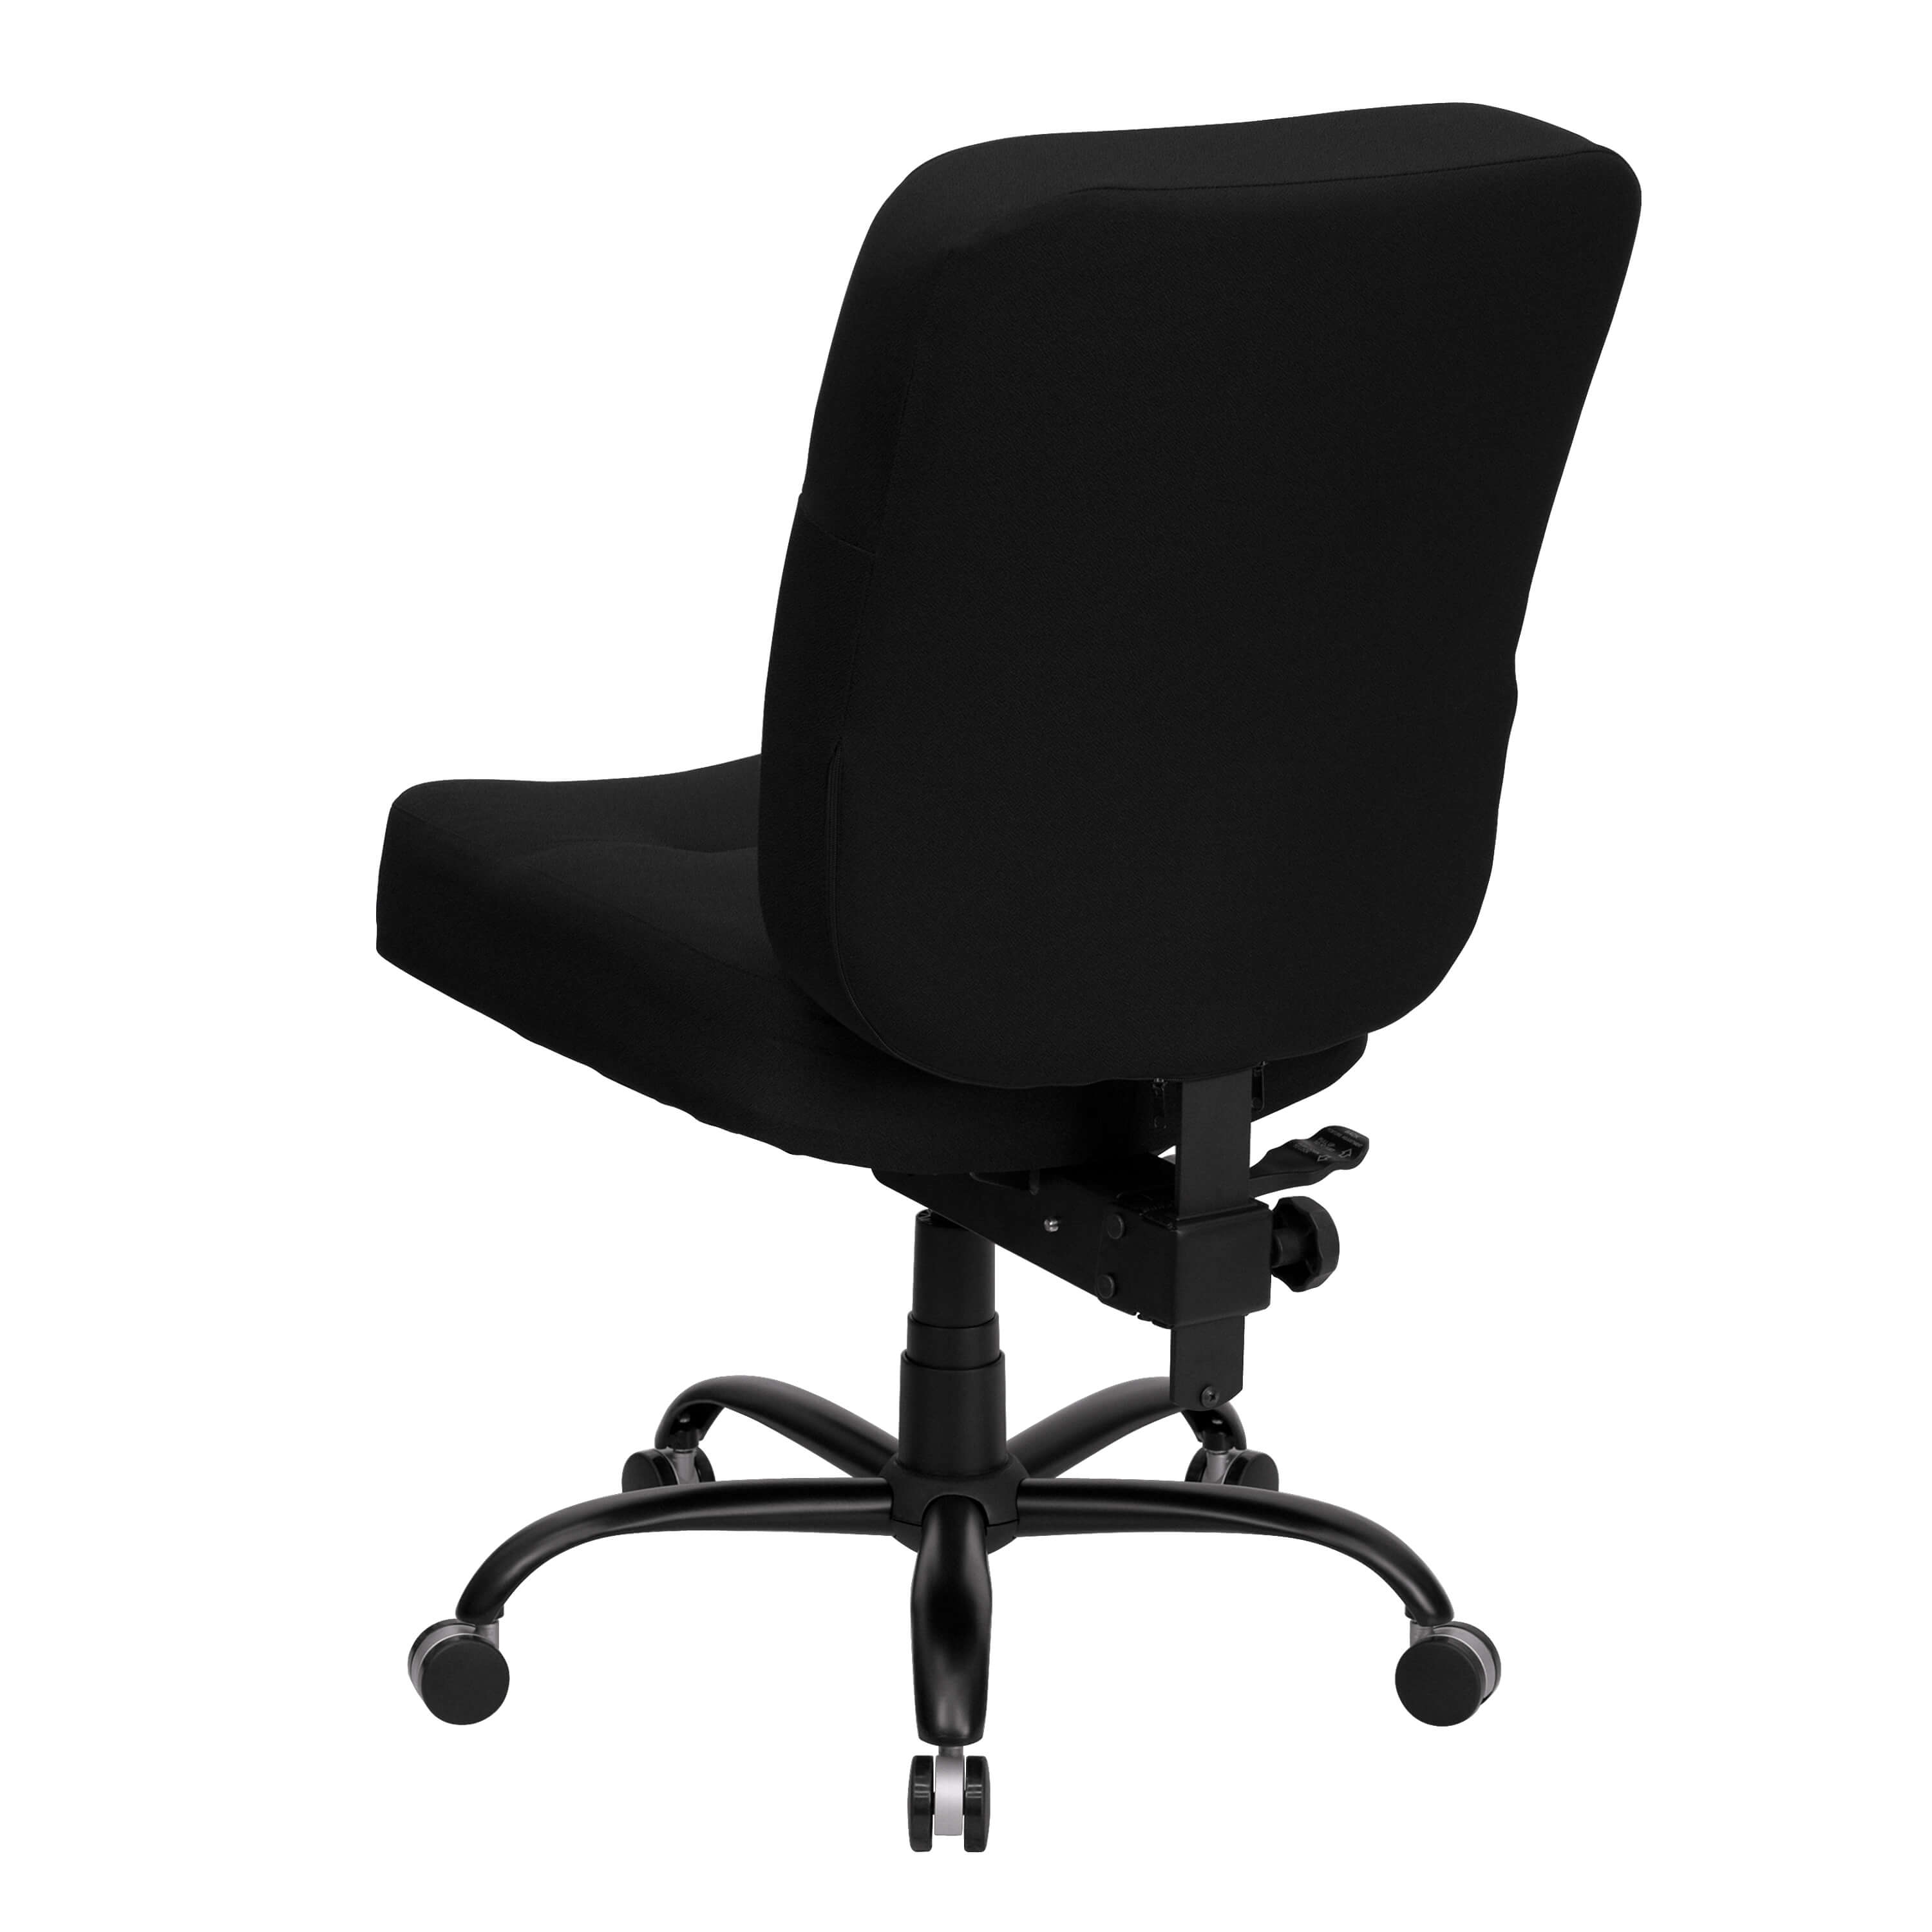 High weight capacity office chair back view